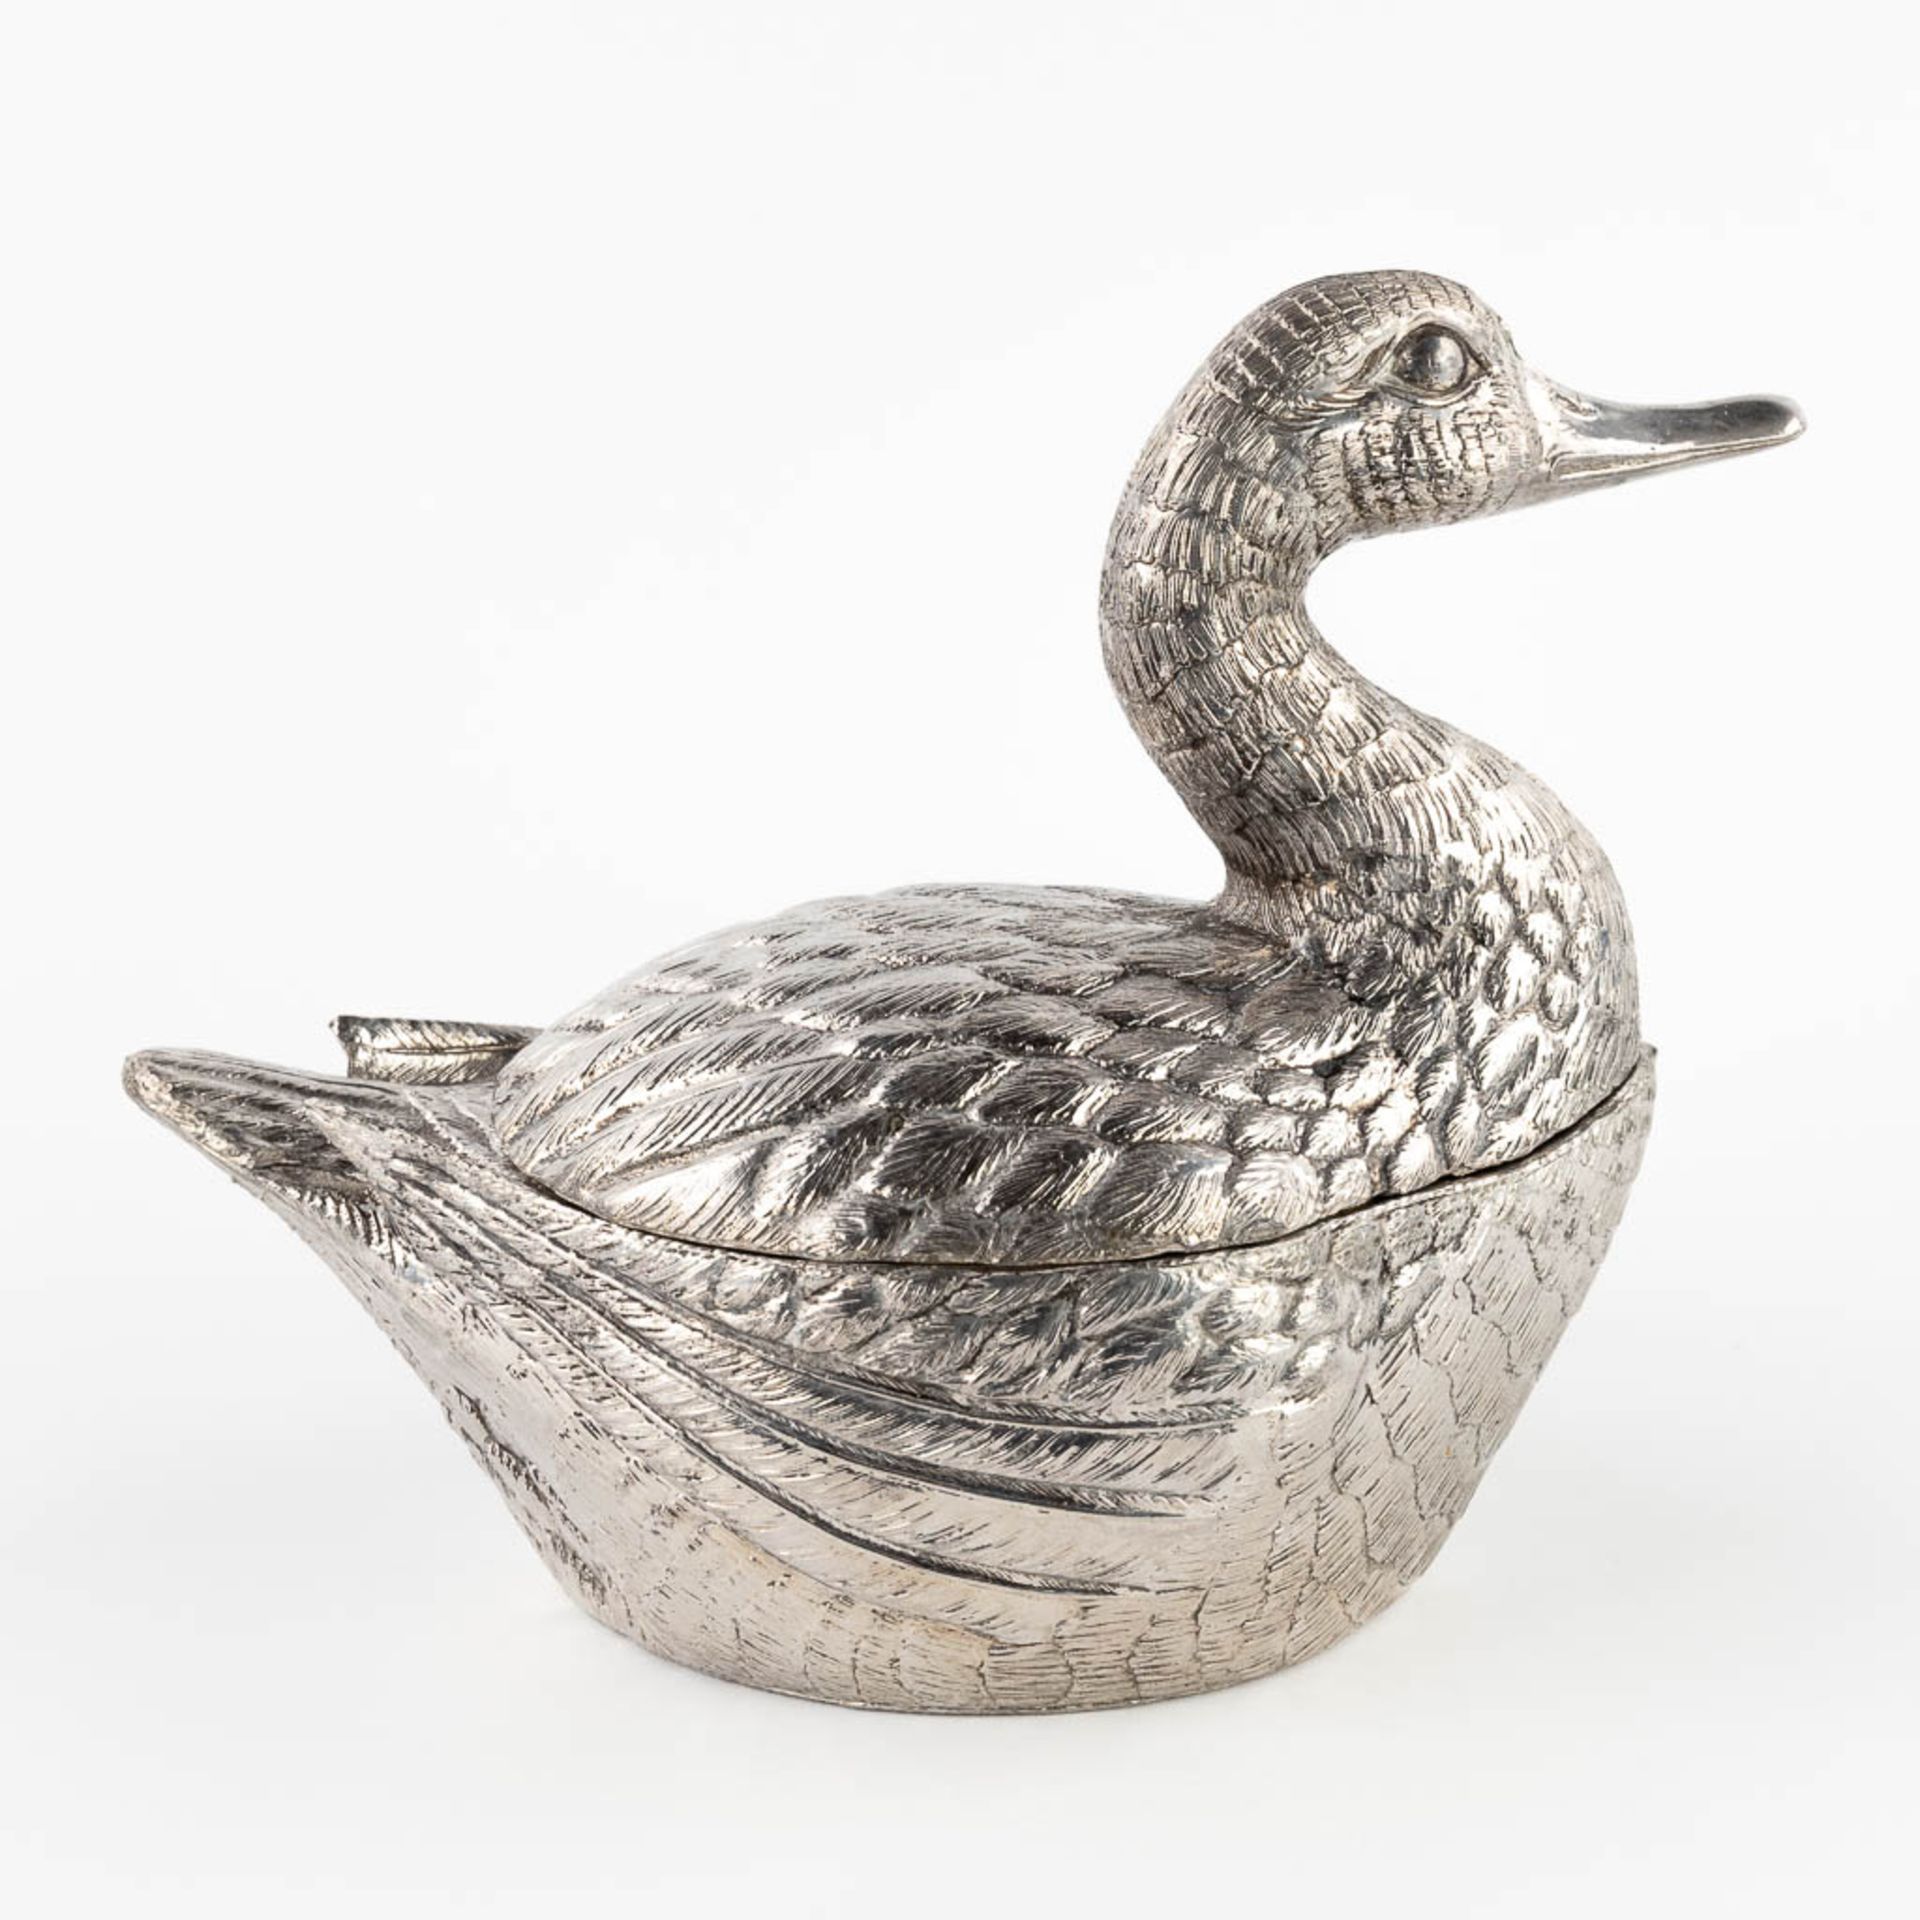 Mauro MANETTI (1946) 'Duck' an ice pail. (D:15 x W:27 x H:22 cm) - Image 3 of 11